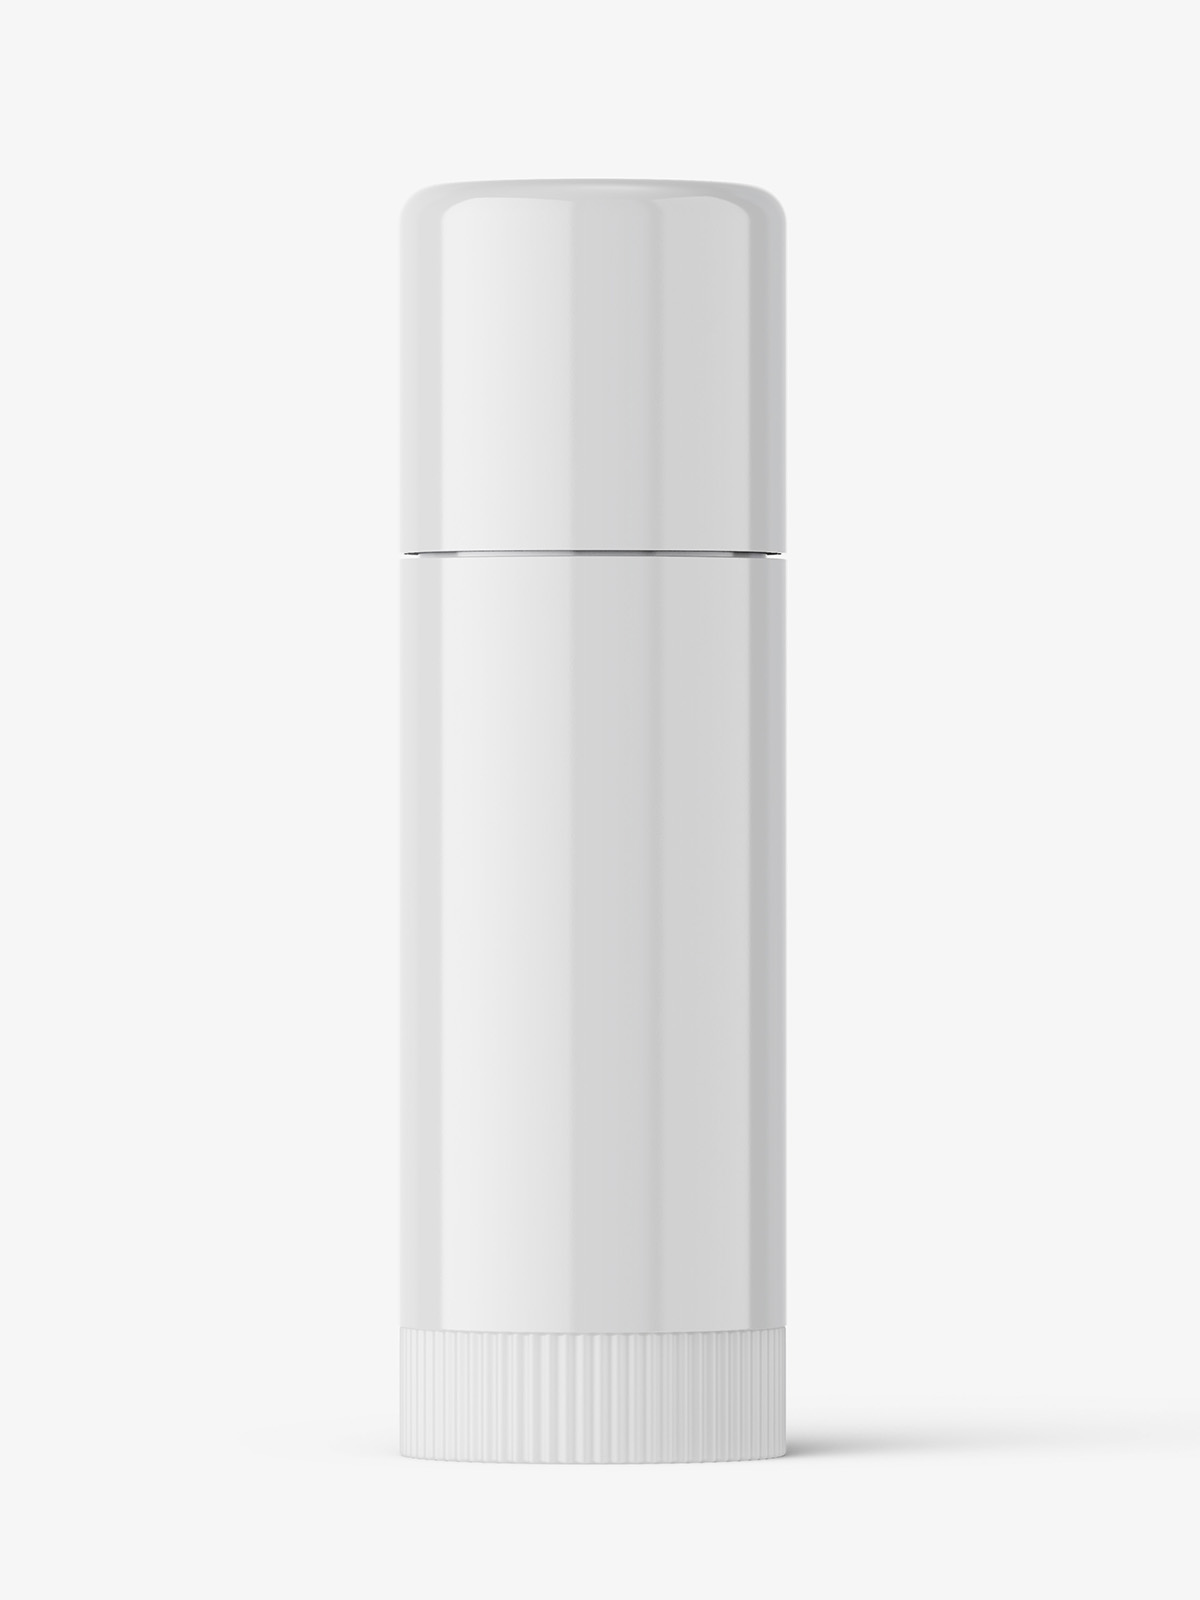 Download Closed deo stick mockup / glossy - Smarty Mockups